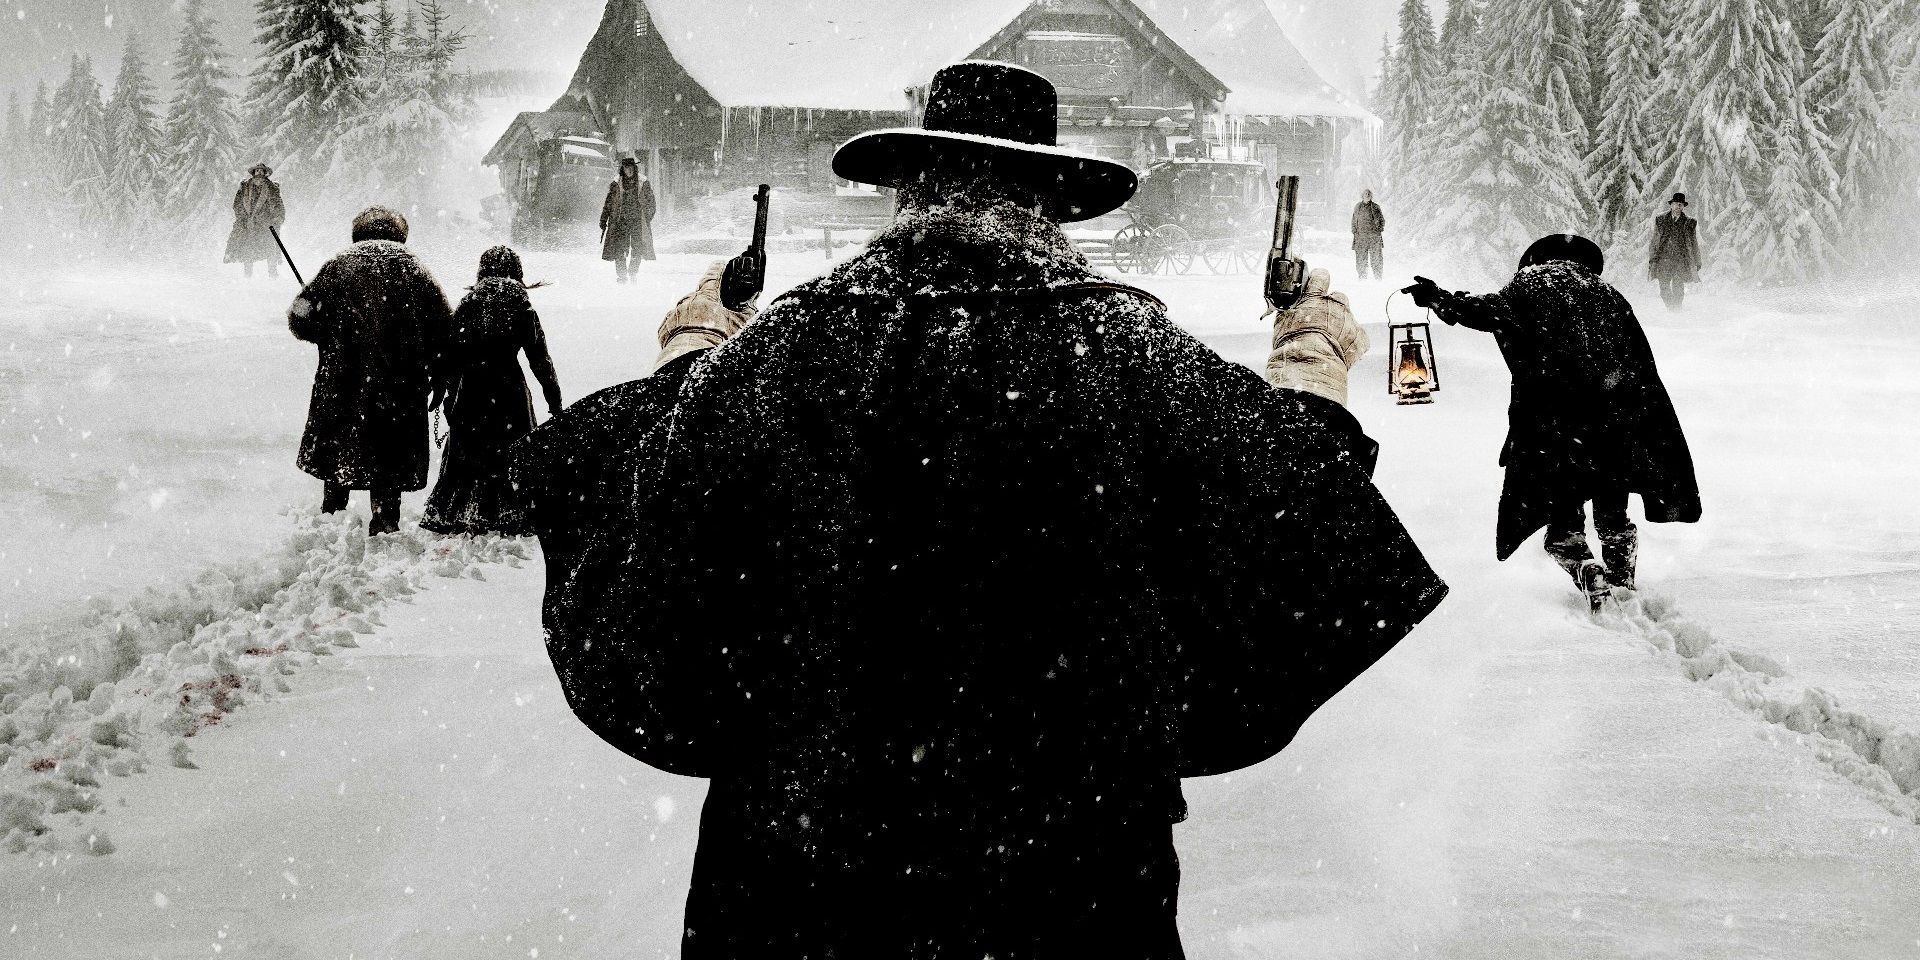 The poster for The Hateful Eight